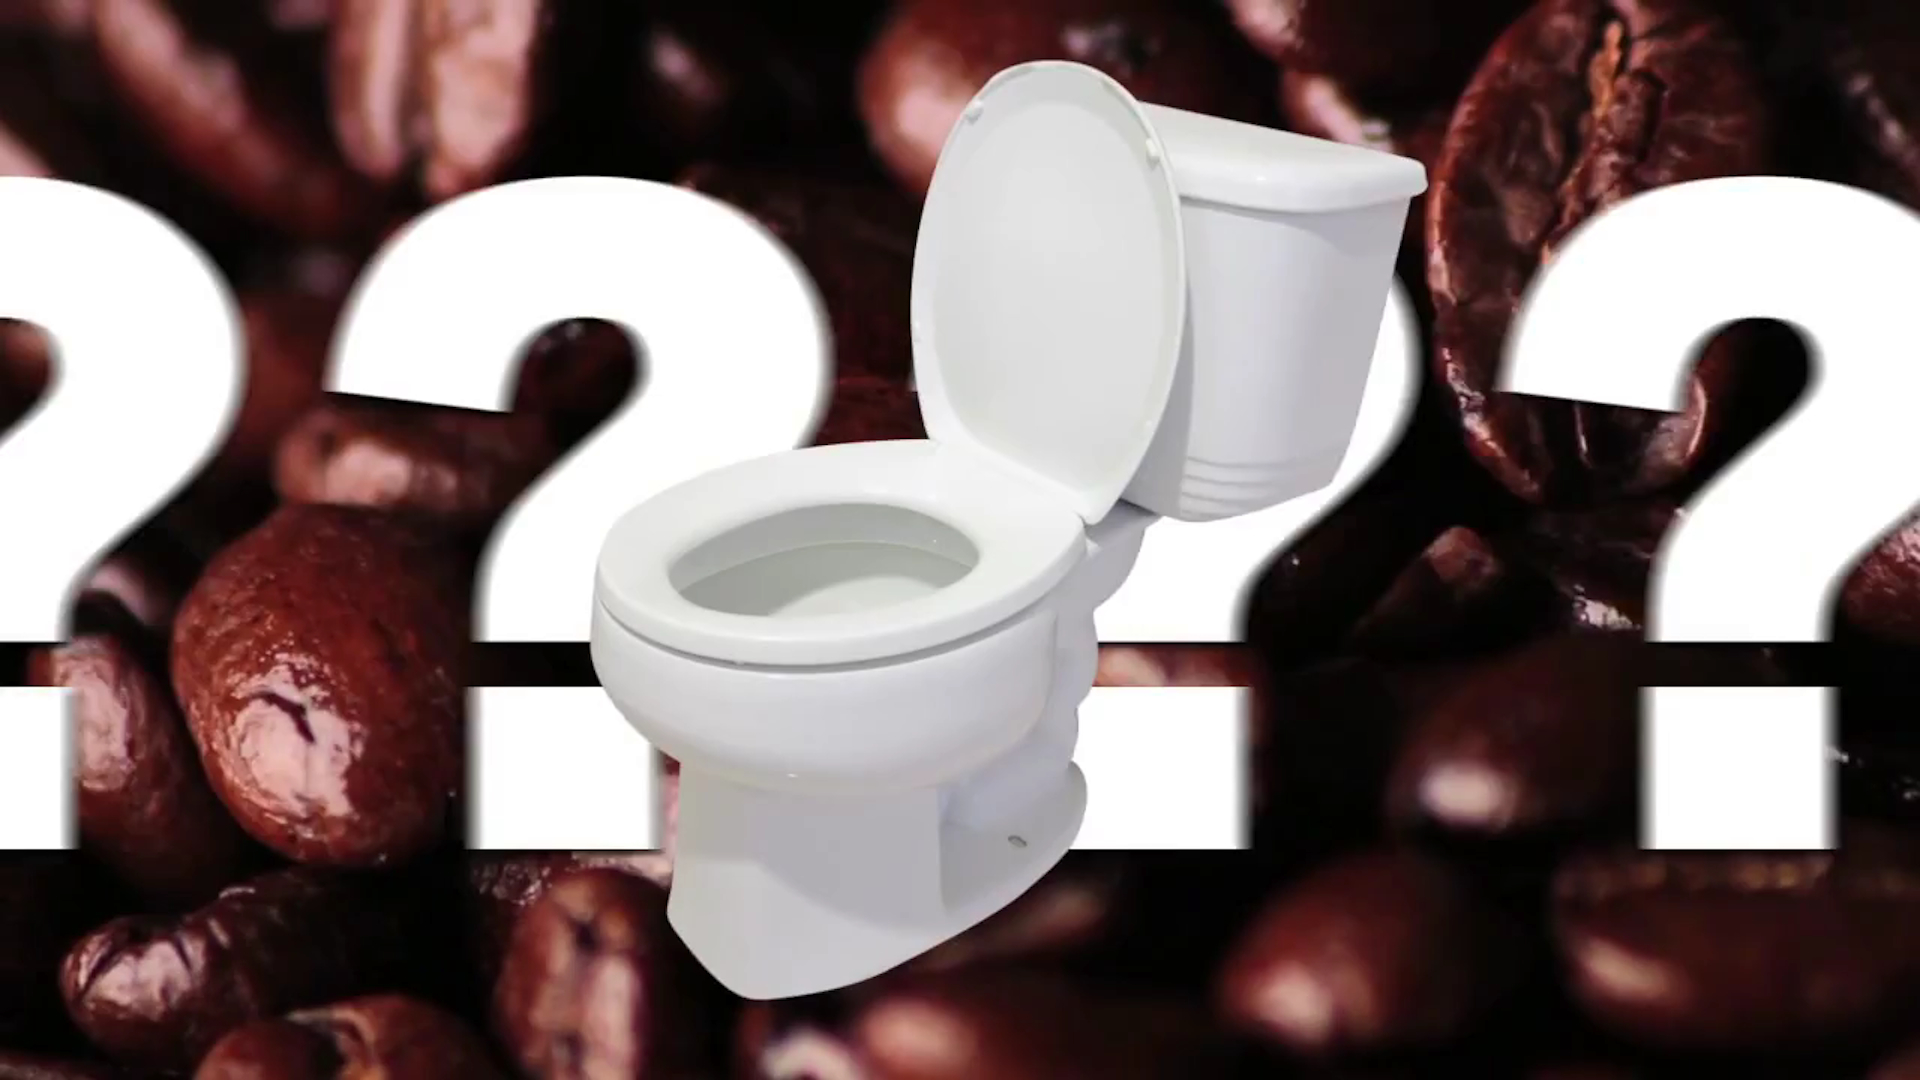 Why Does Drinking Coffee Make You Poop?